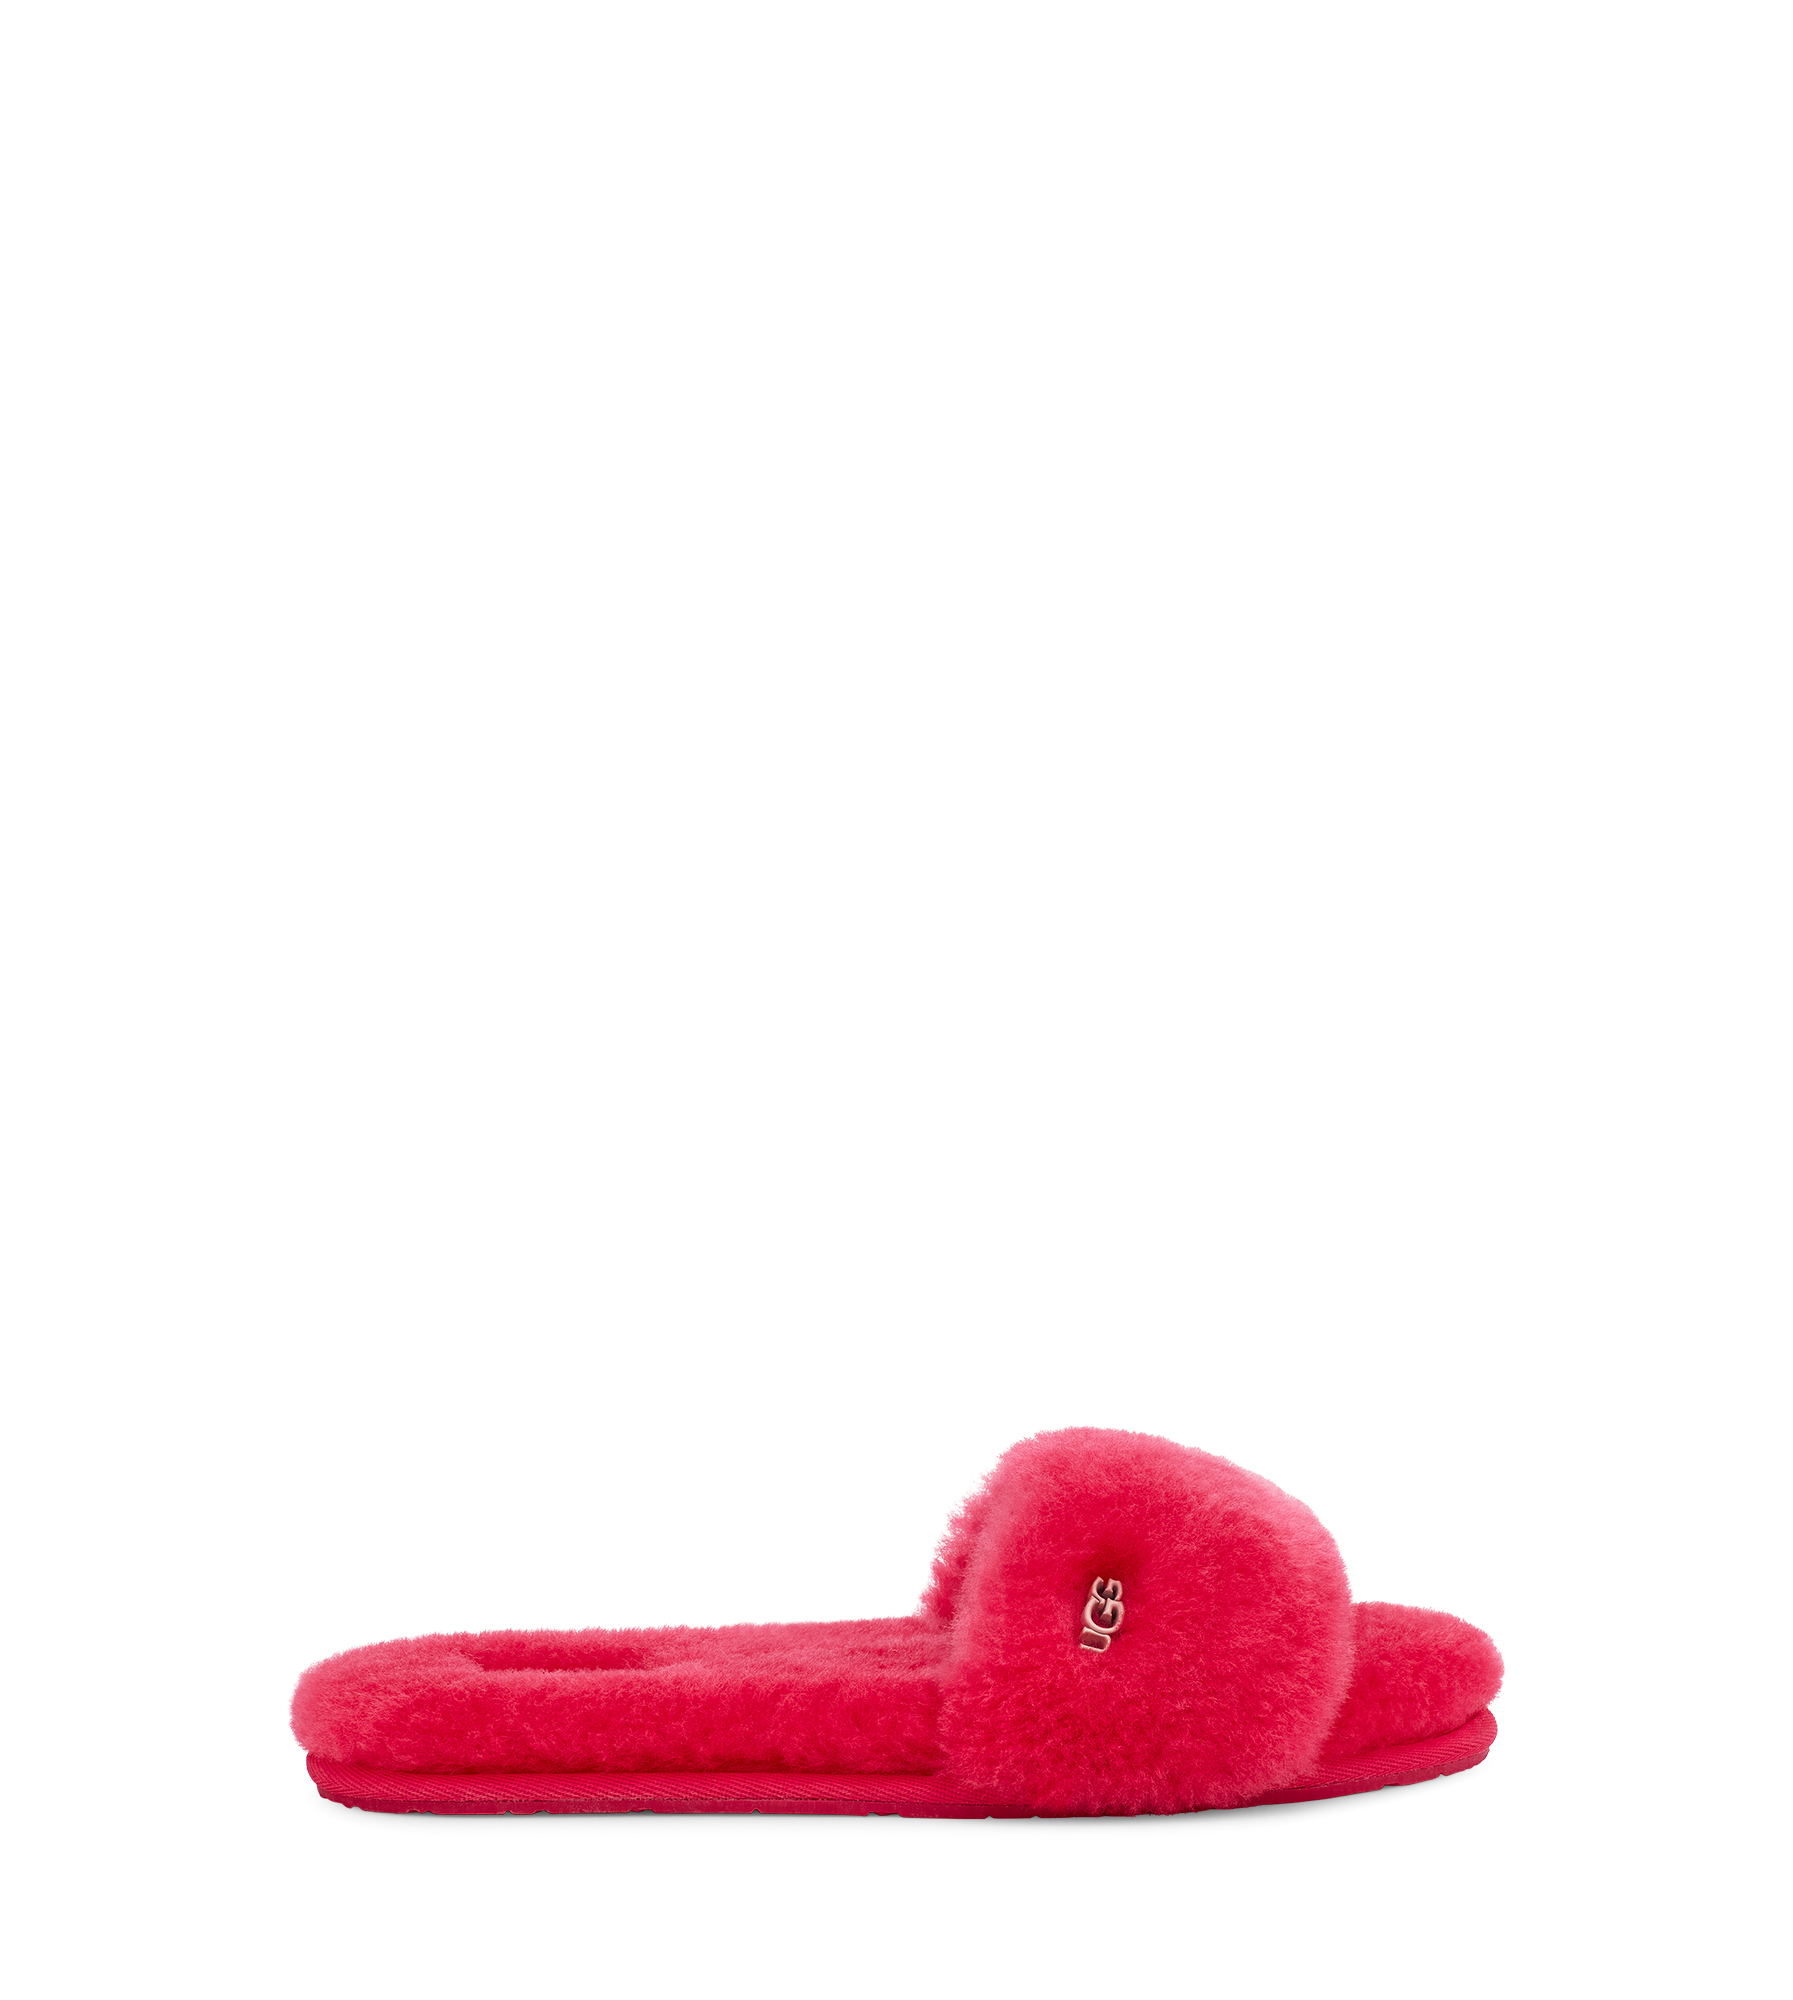 Fluff Slide Chaussons in Radish, Taille 40